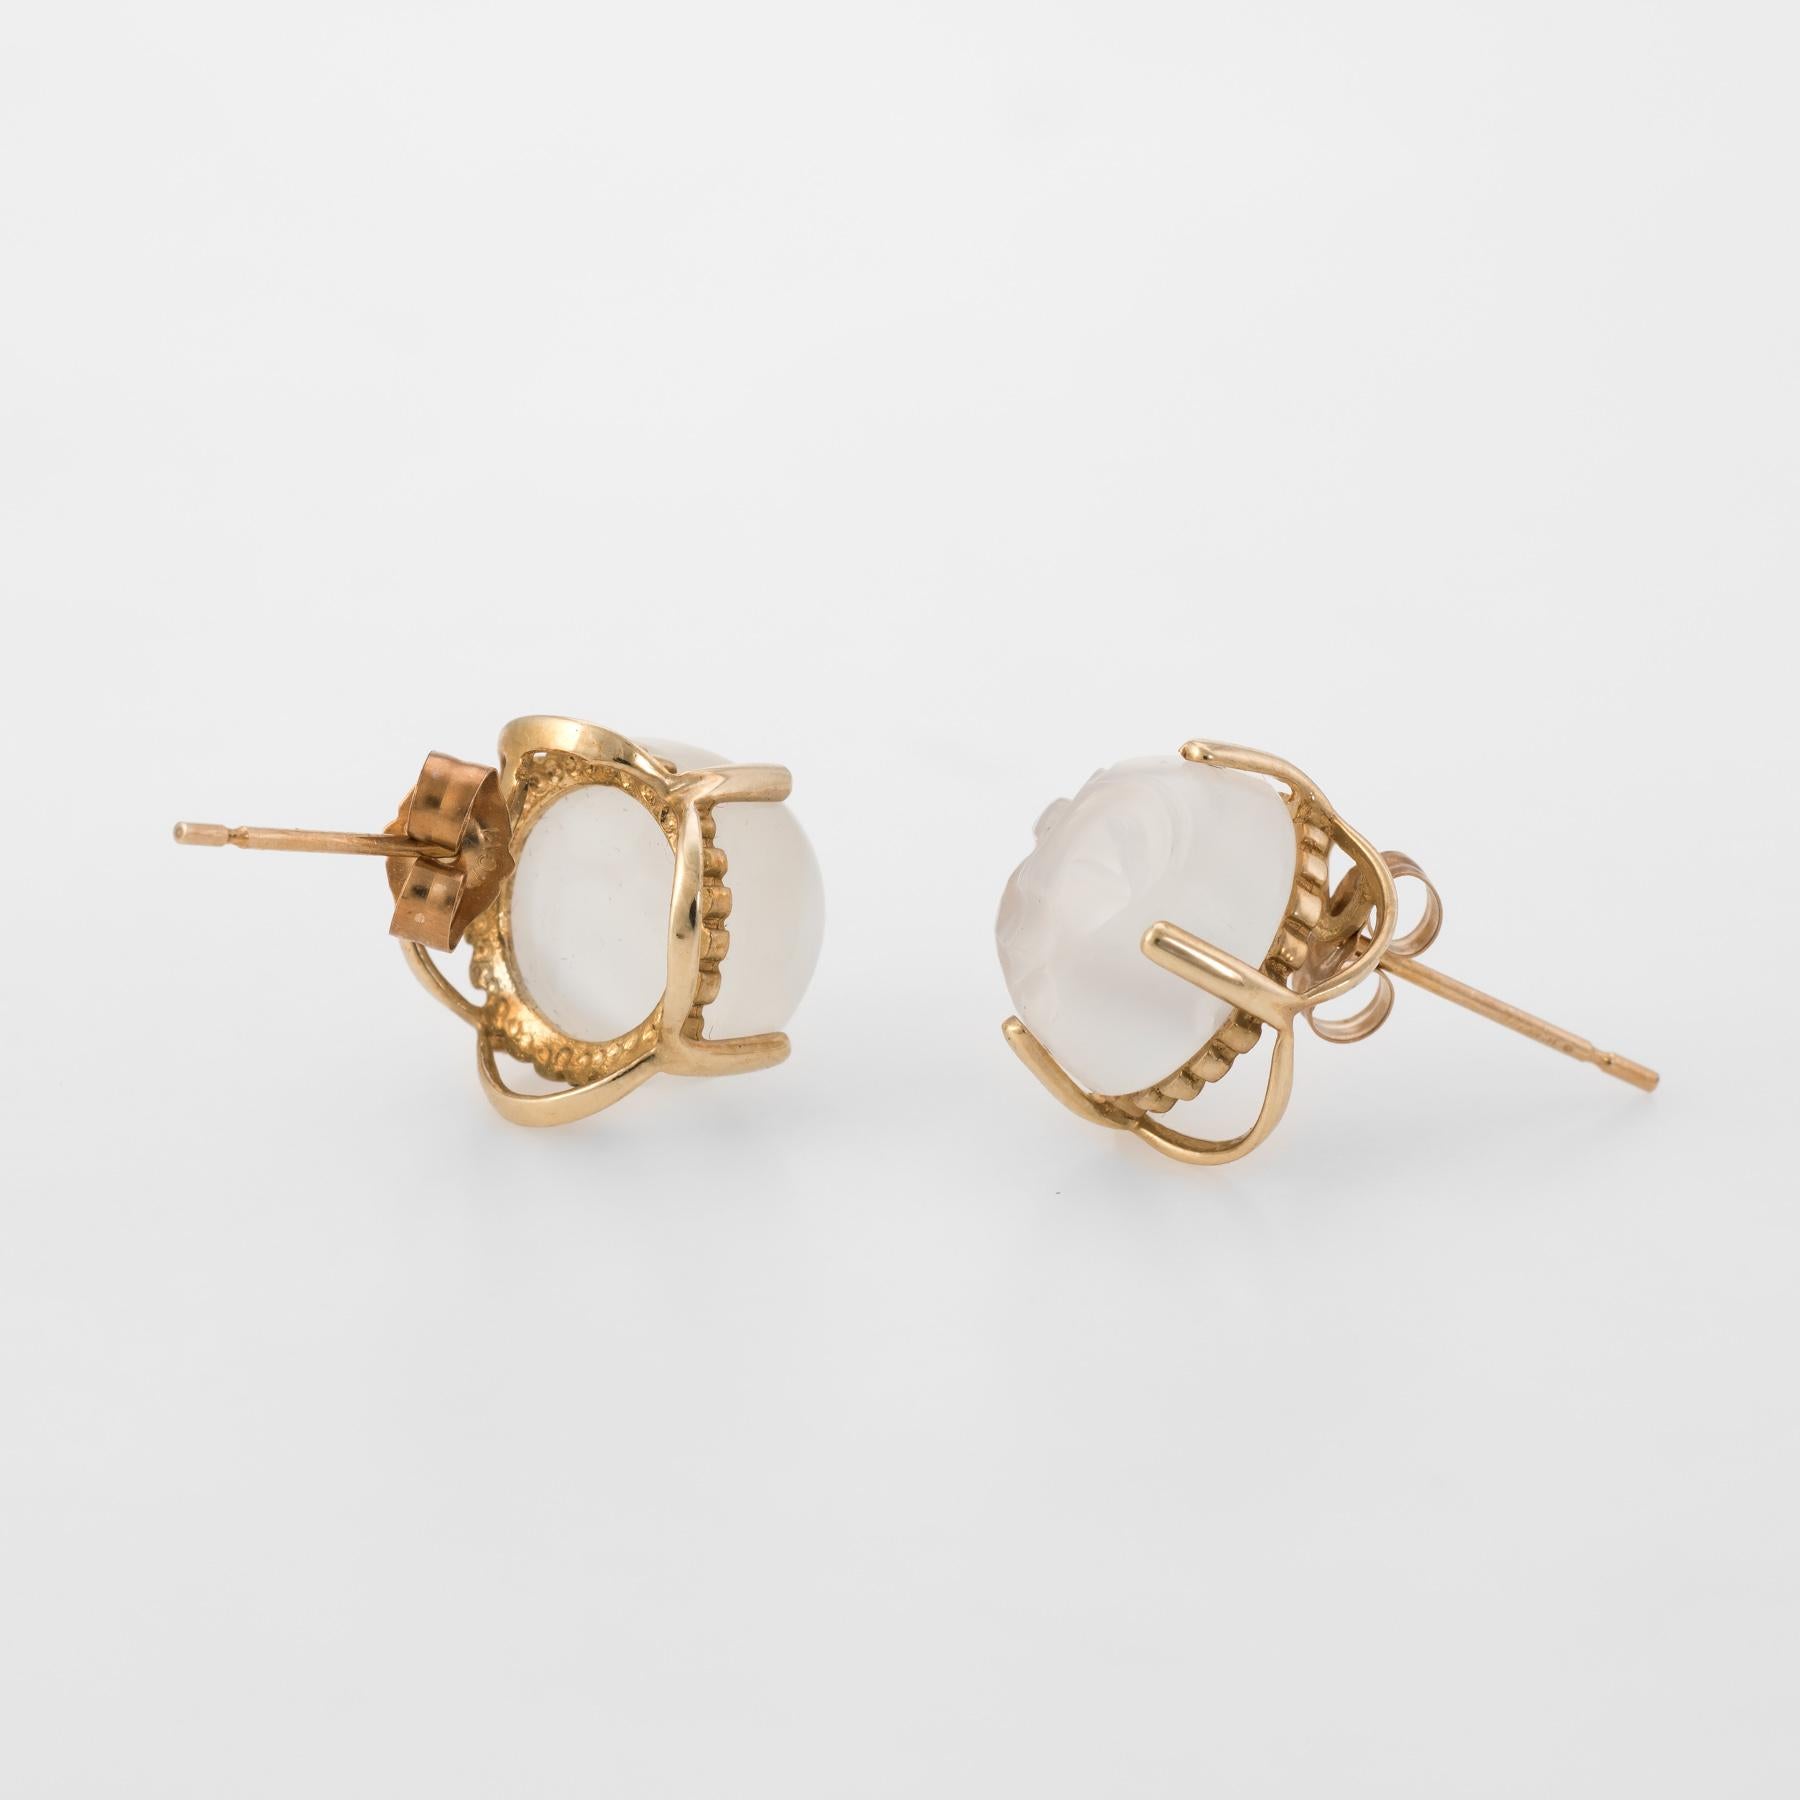 Striking Man in the Moon earrings (circa 1960s to 1970s), crafted in 10 karat yellow gold. 

Centrally mounted iridescent carved moonstone faces each measure 10mm. The moonstone is in excellent condition and free of cracks or chips.   

The matching